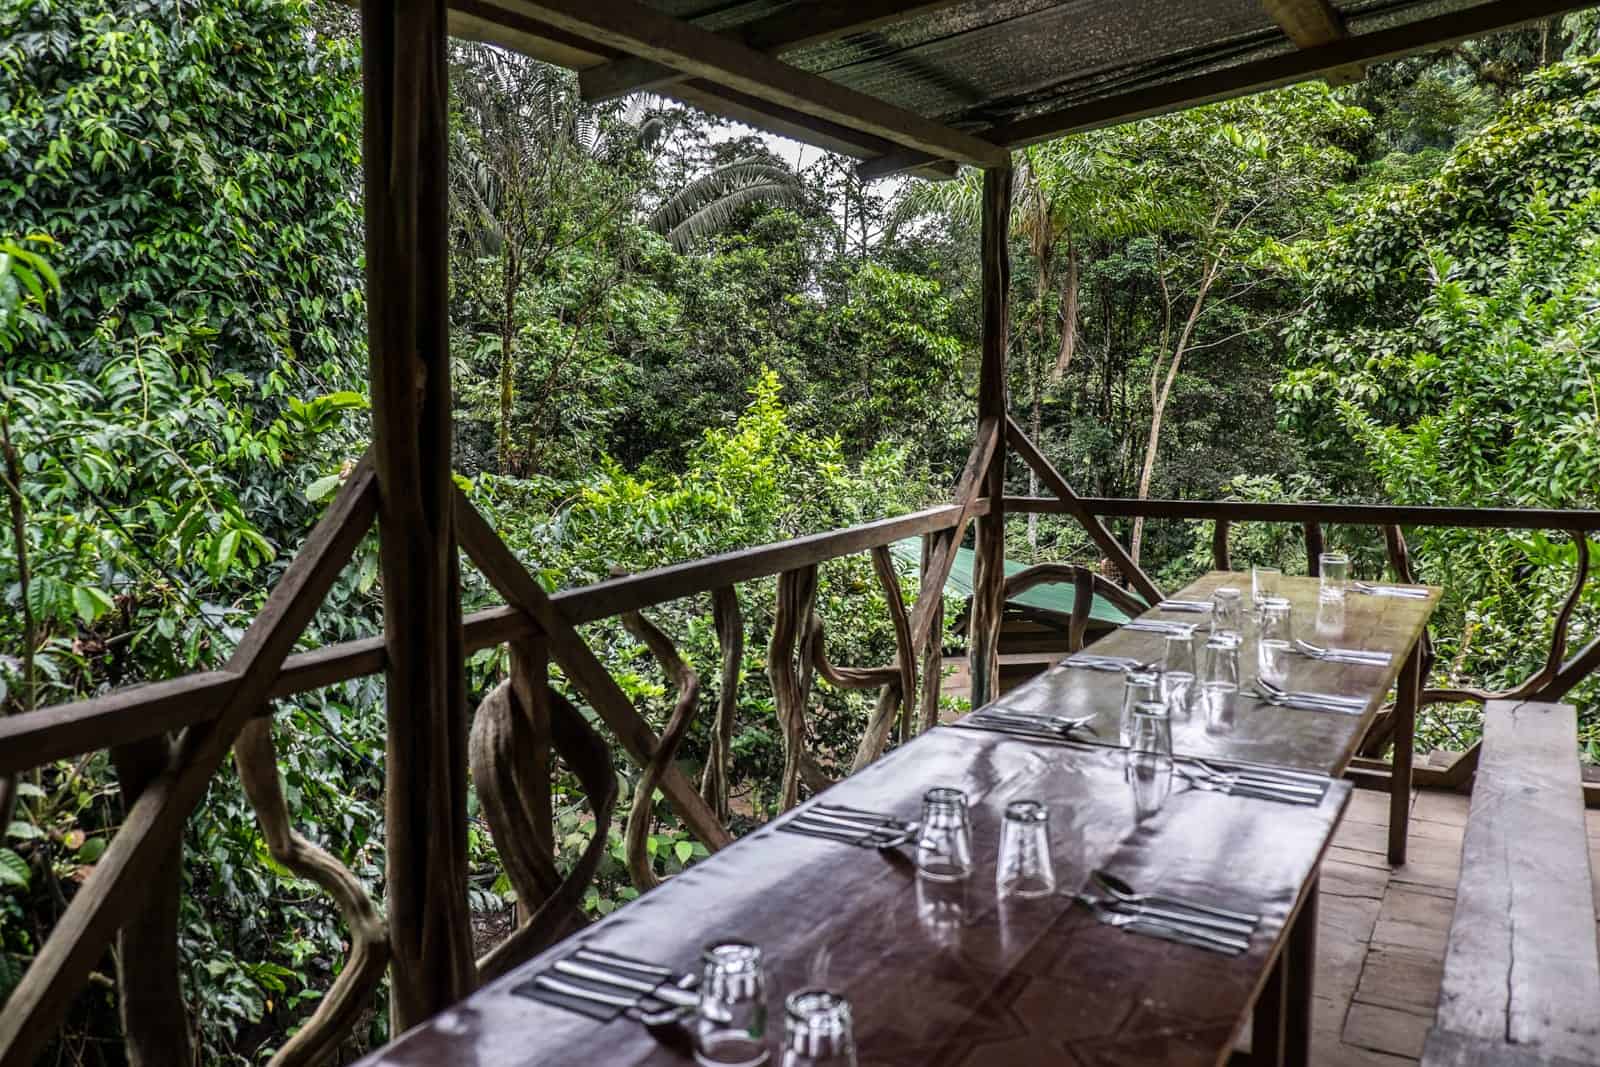 A long table with glasses and cutlery inside a wooden hut, surrounded by the dense Ecuador Amazon Jungle foliage. 